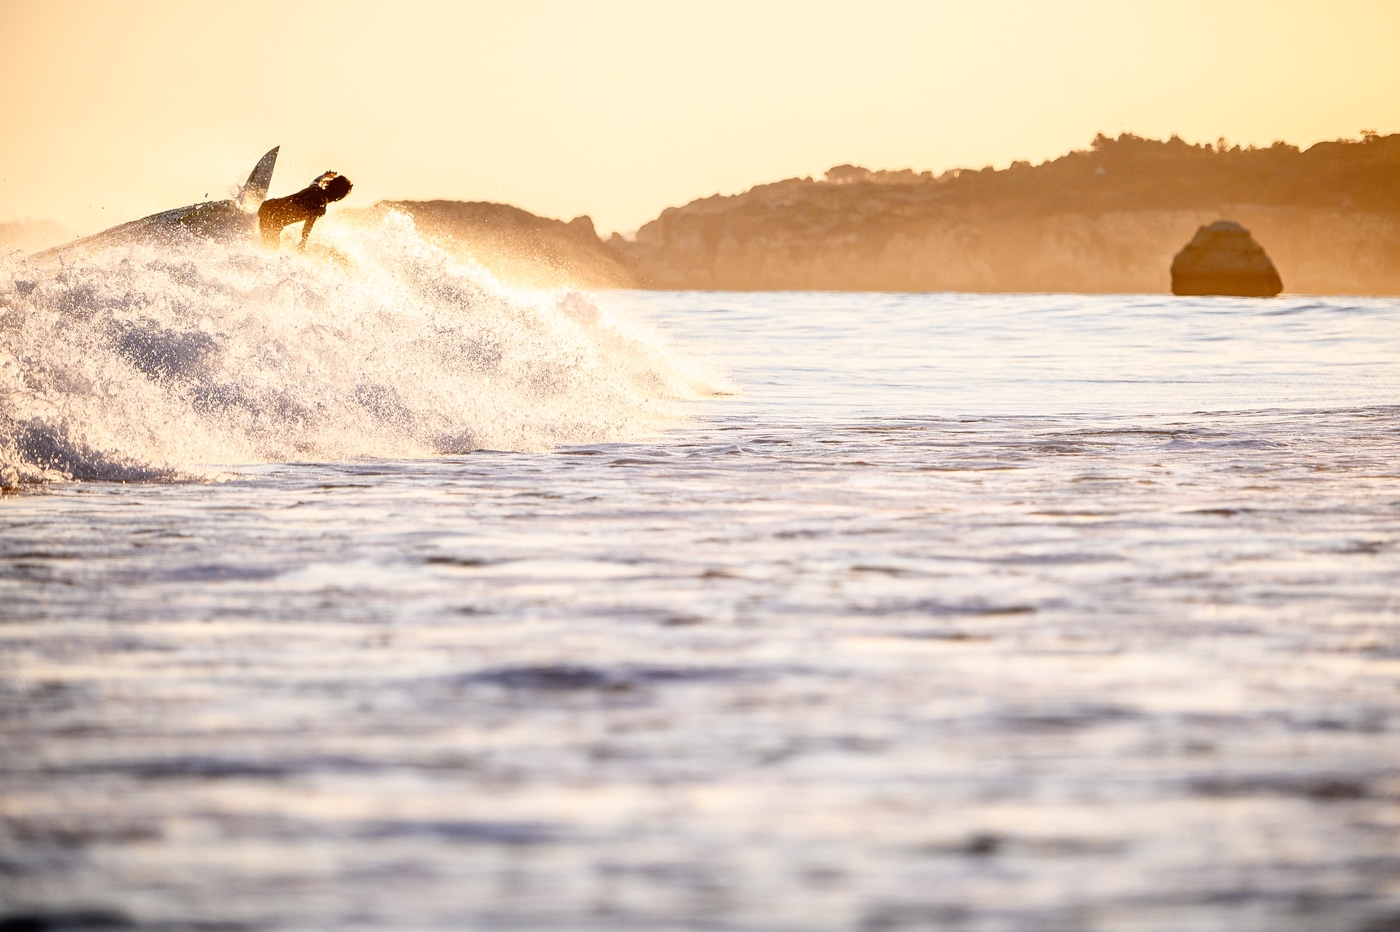 5 reasons why Portugal is one of the best surfing destination